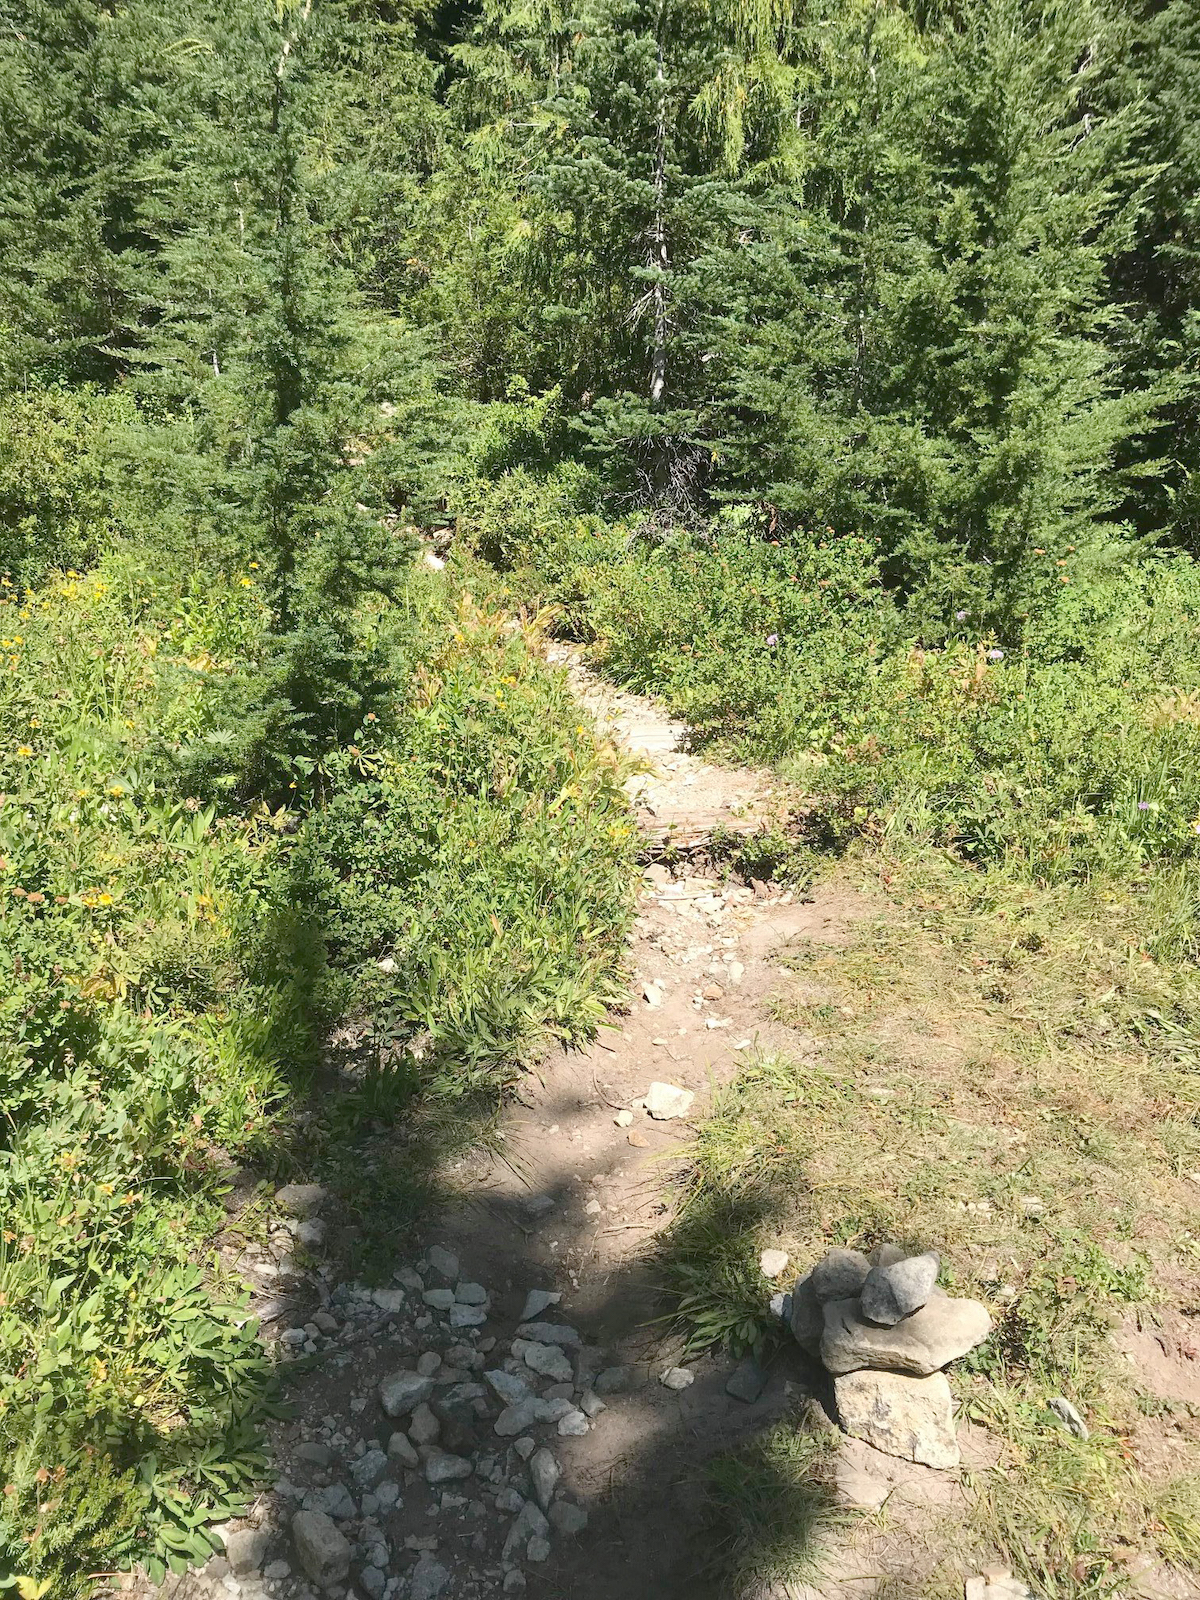 A cairn marks the mostly secret path to Manning's final resting place. [Photo] Katie Ives